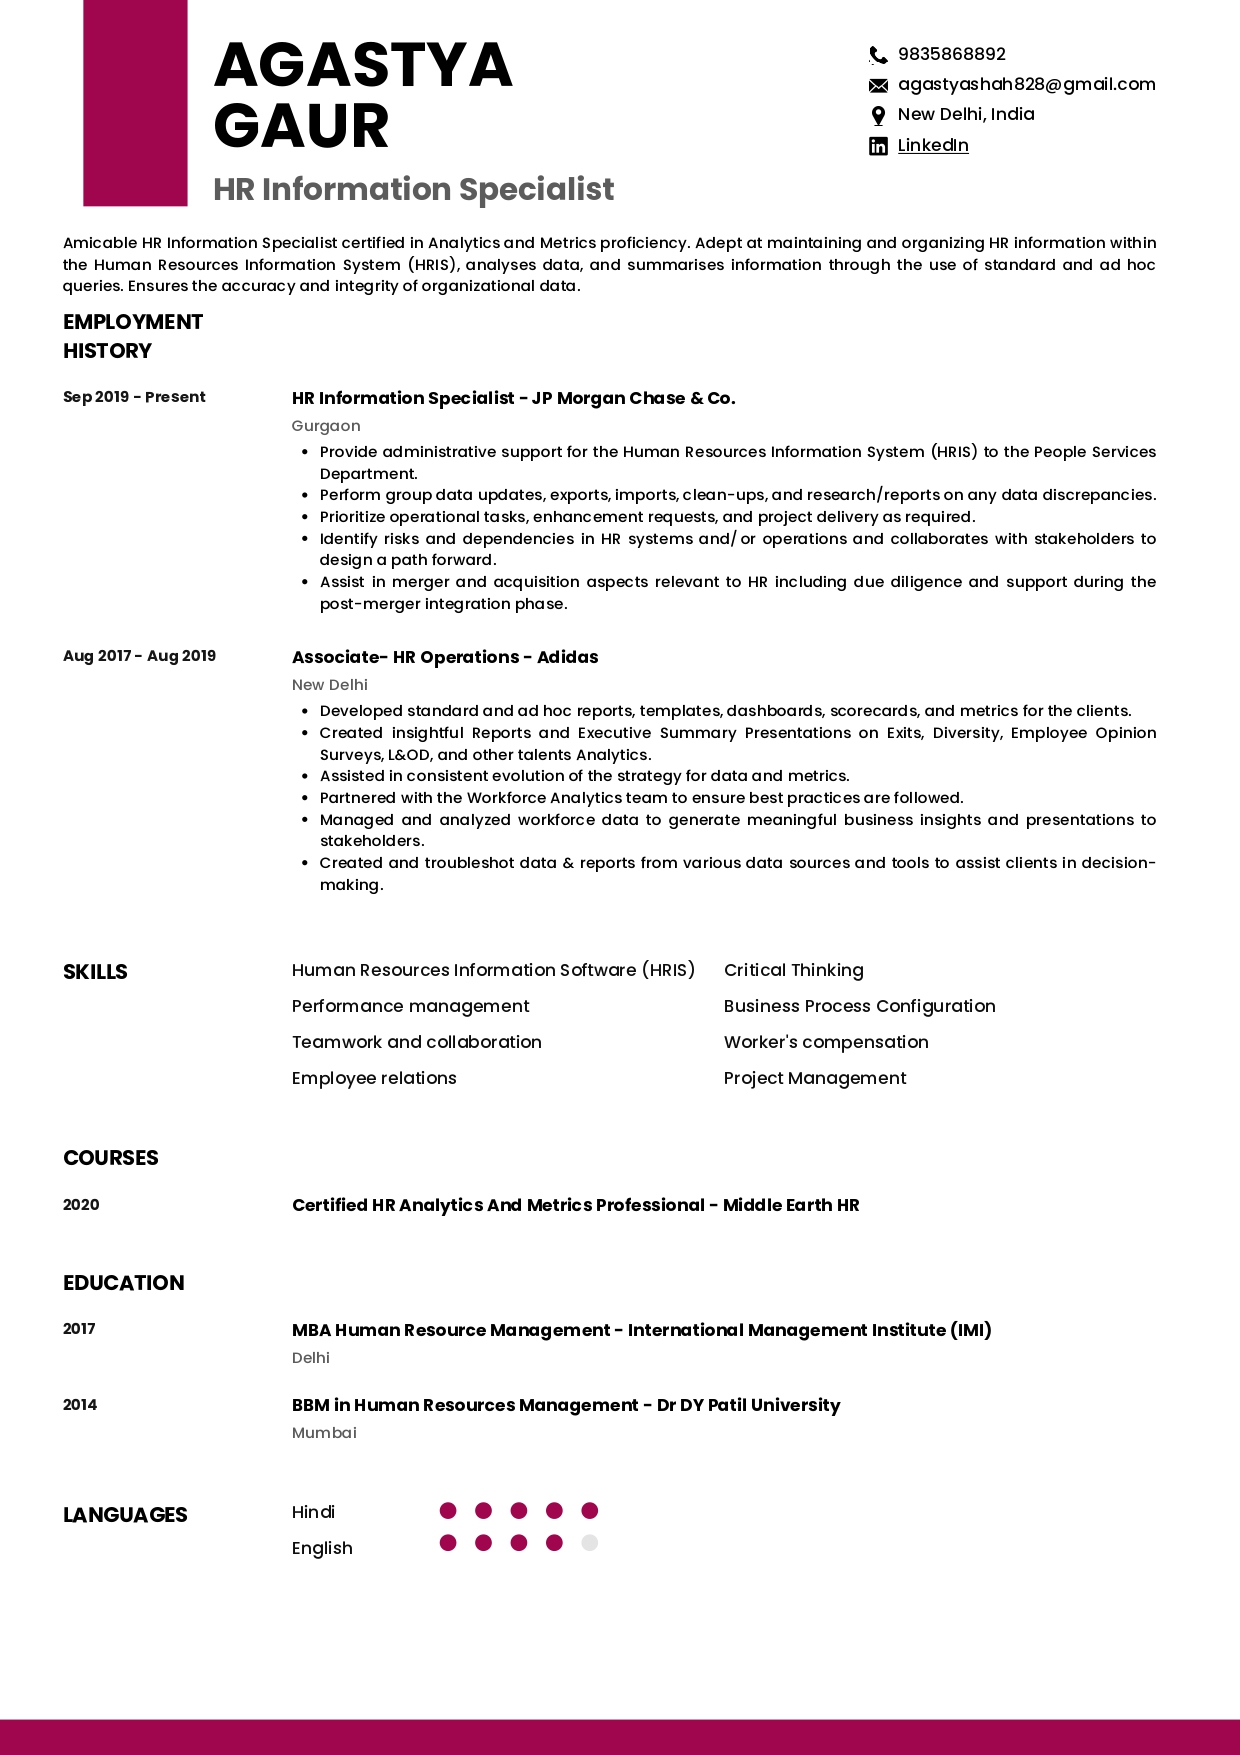 Sample Resume of HR Information Specialist | Free Resume Templates & Samples on Resumod.co